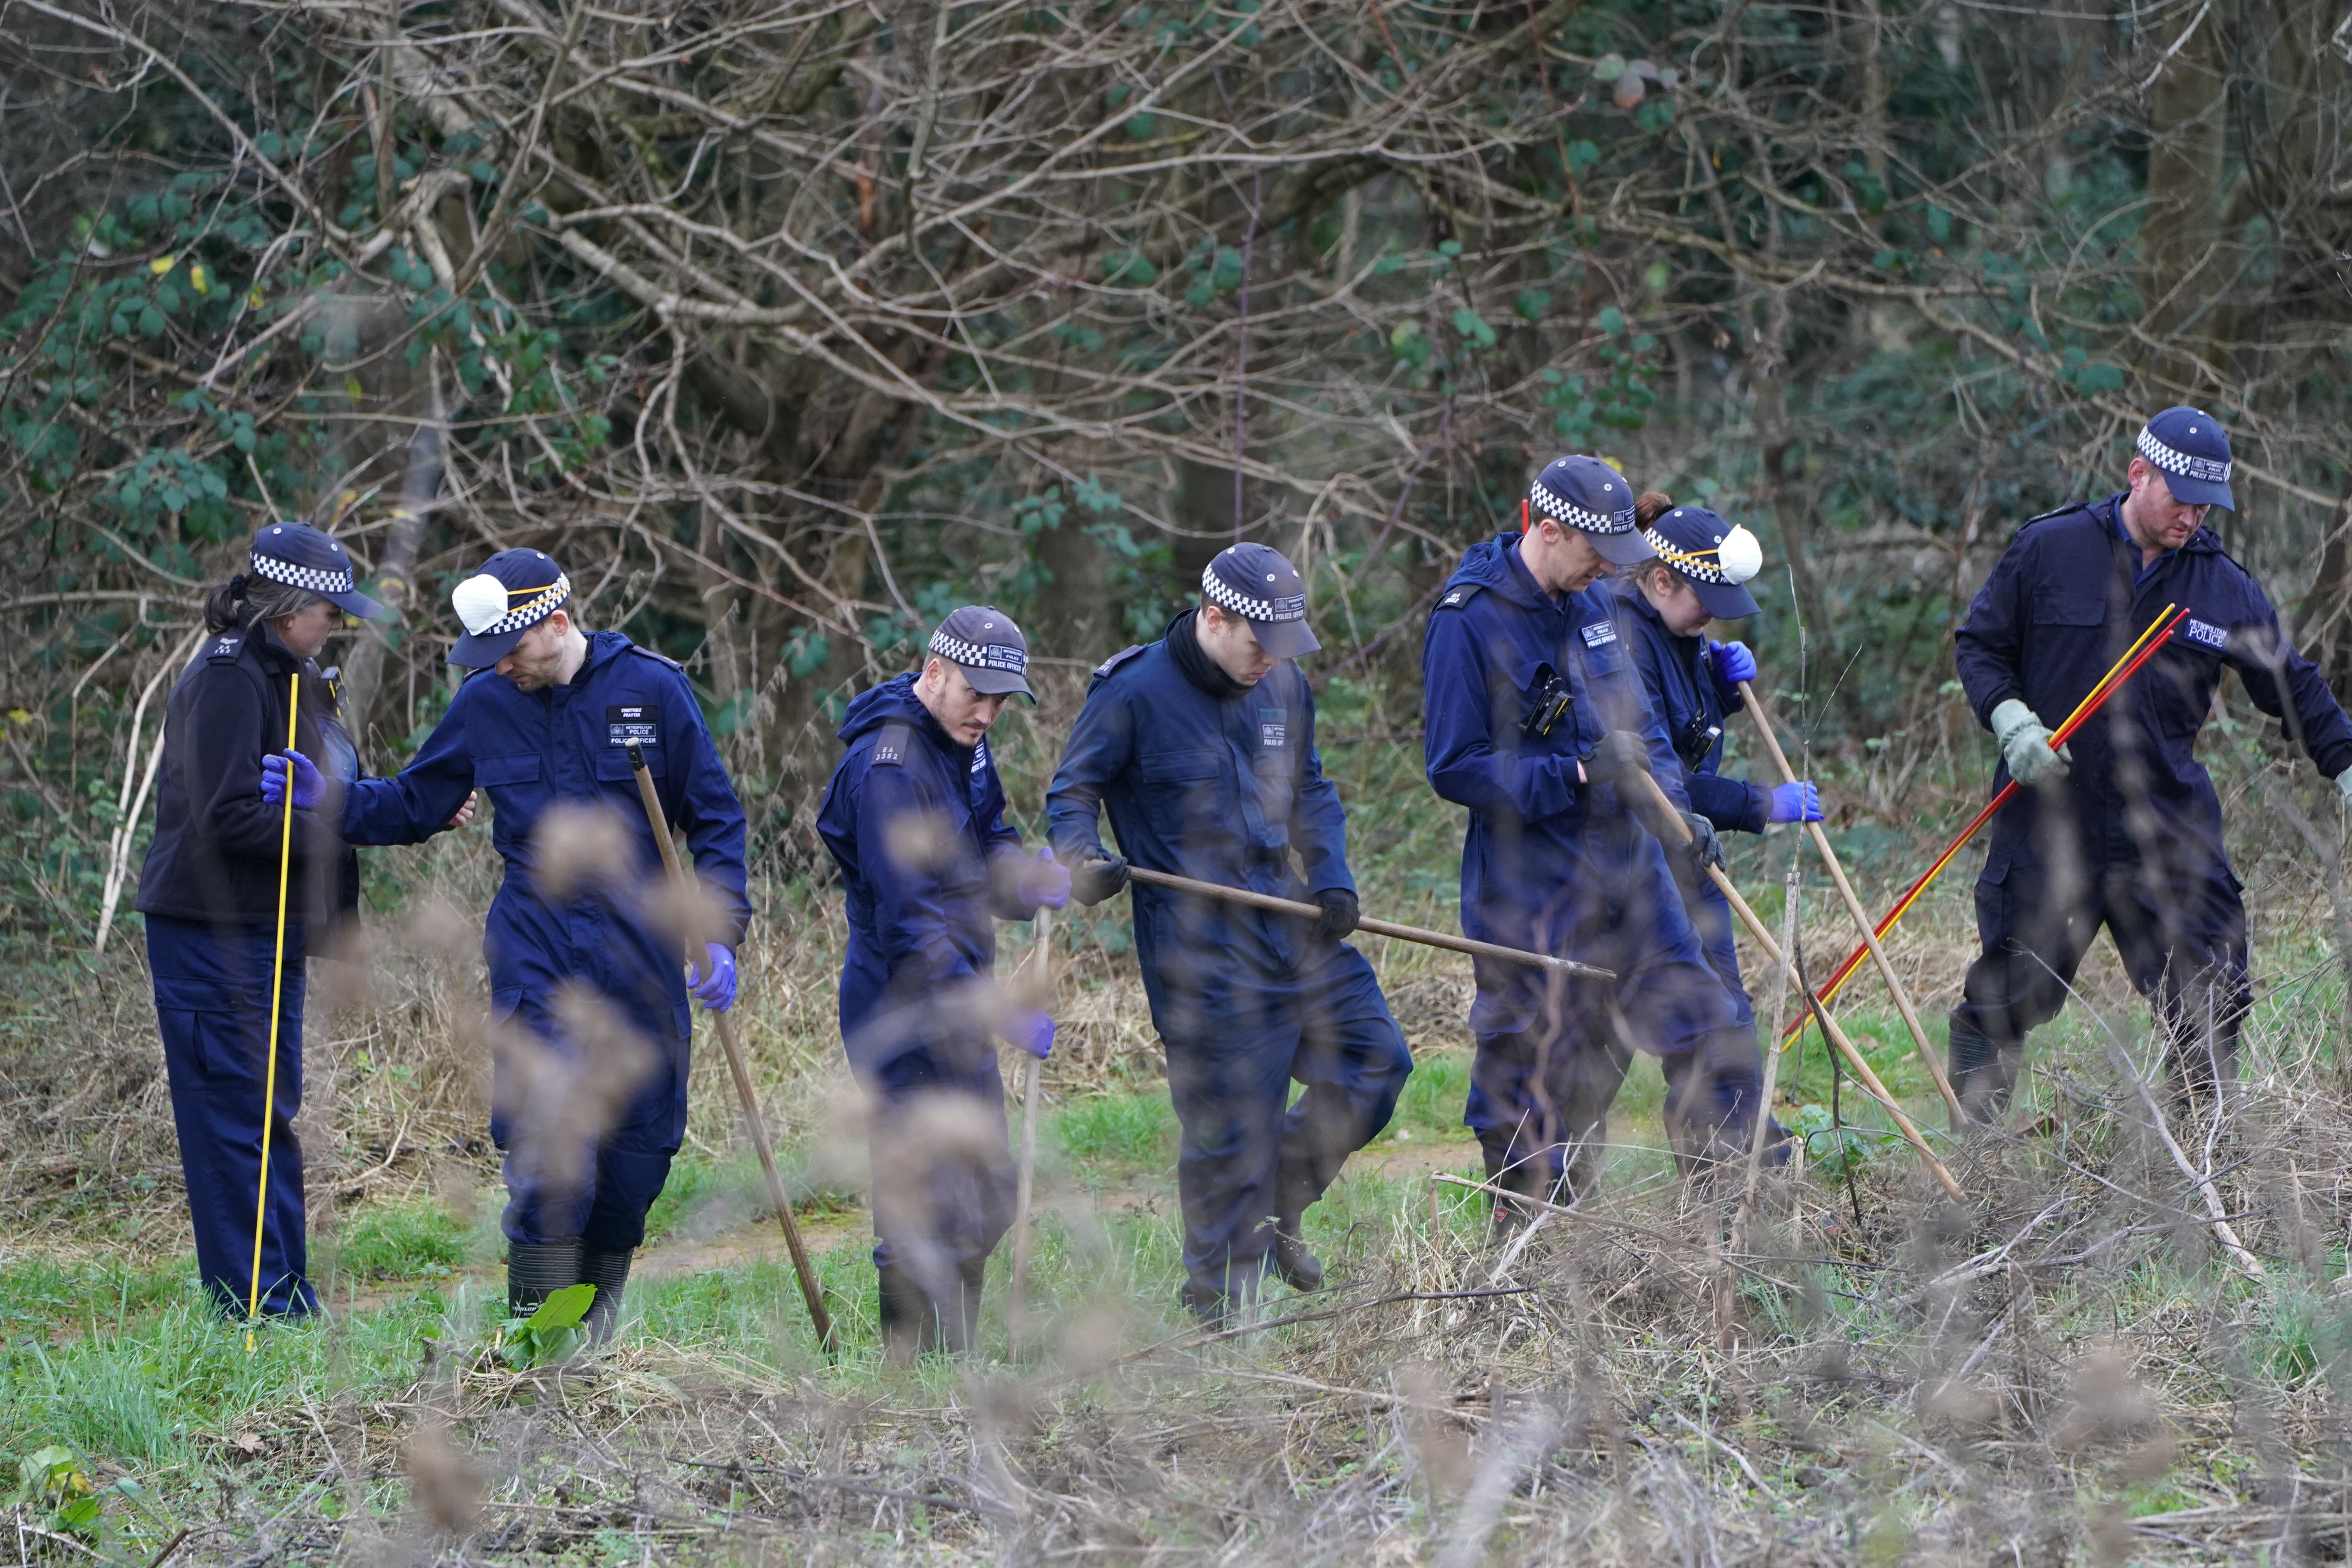 Police activity at Philpot’s Farm Open Space, close to Heather Lane in Yiewsley, Hillingdon, west London (Kirsty O’Connor/PA)